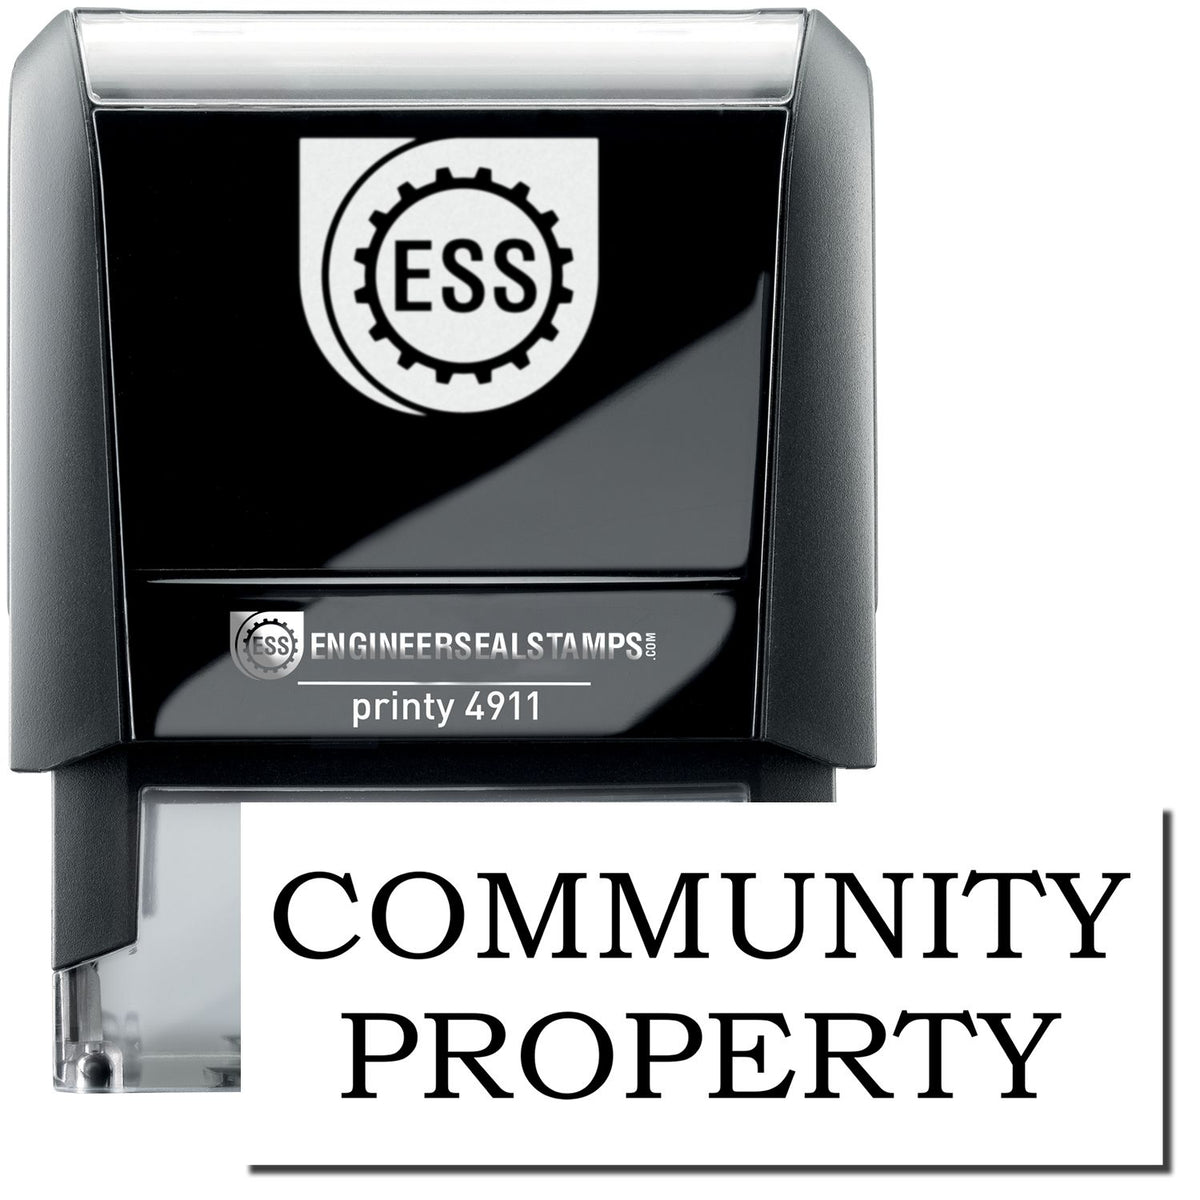 A self-inking stamp with a stamped image showing how the text &quot;COMMUNITY PROPERTY&quot; is displayed after stamping.